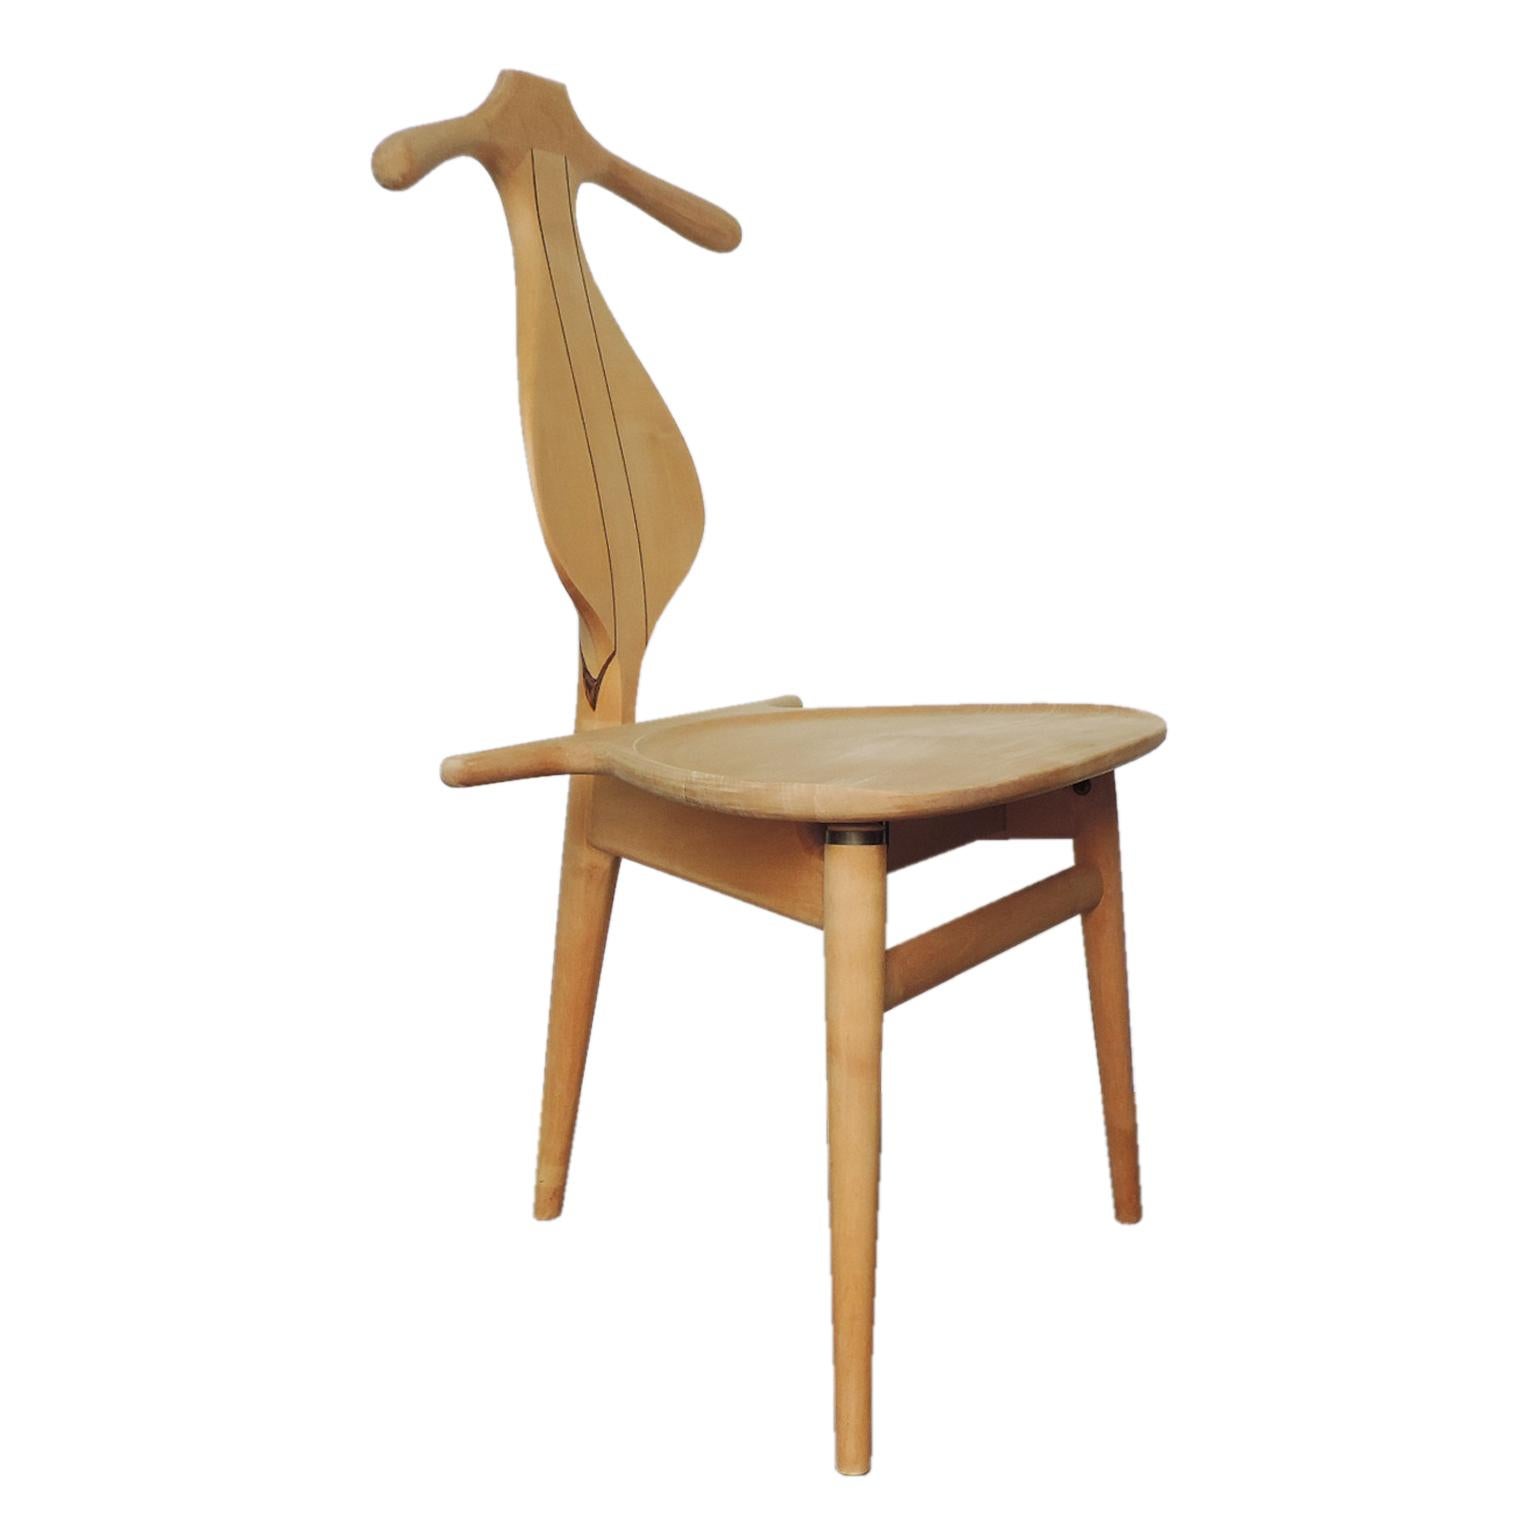 One of the most sculptural and iconic three-legged chairs ever designed by Hans J. Wegner. The Valet Chair is the ultimate functional chair to sit in your bedroom, bathroom or simply as a piece of art (like a cello) sitting quietly at the end of a